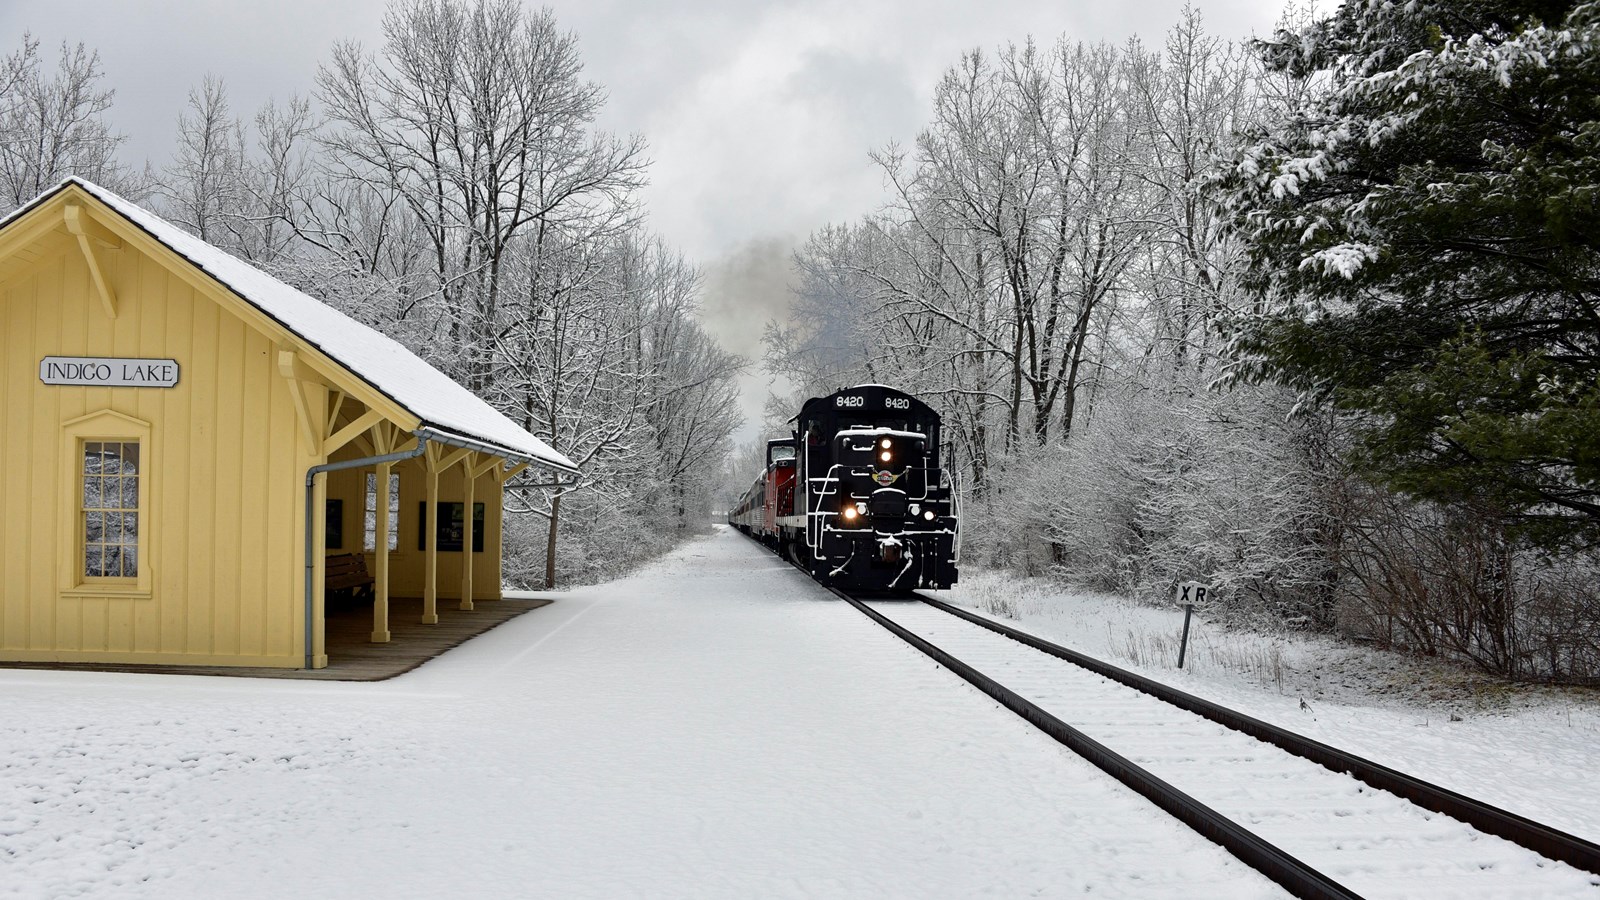 Snow covers trees and yellow station. At right, dark historic train disappears from view on tracks.